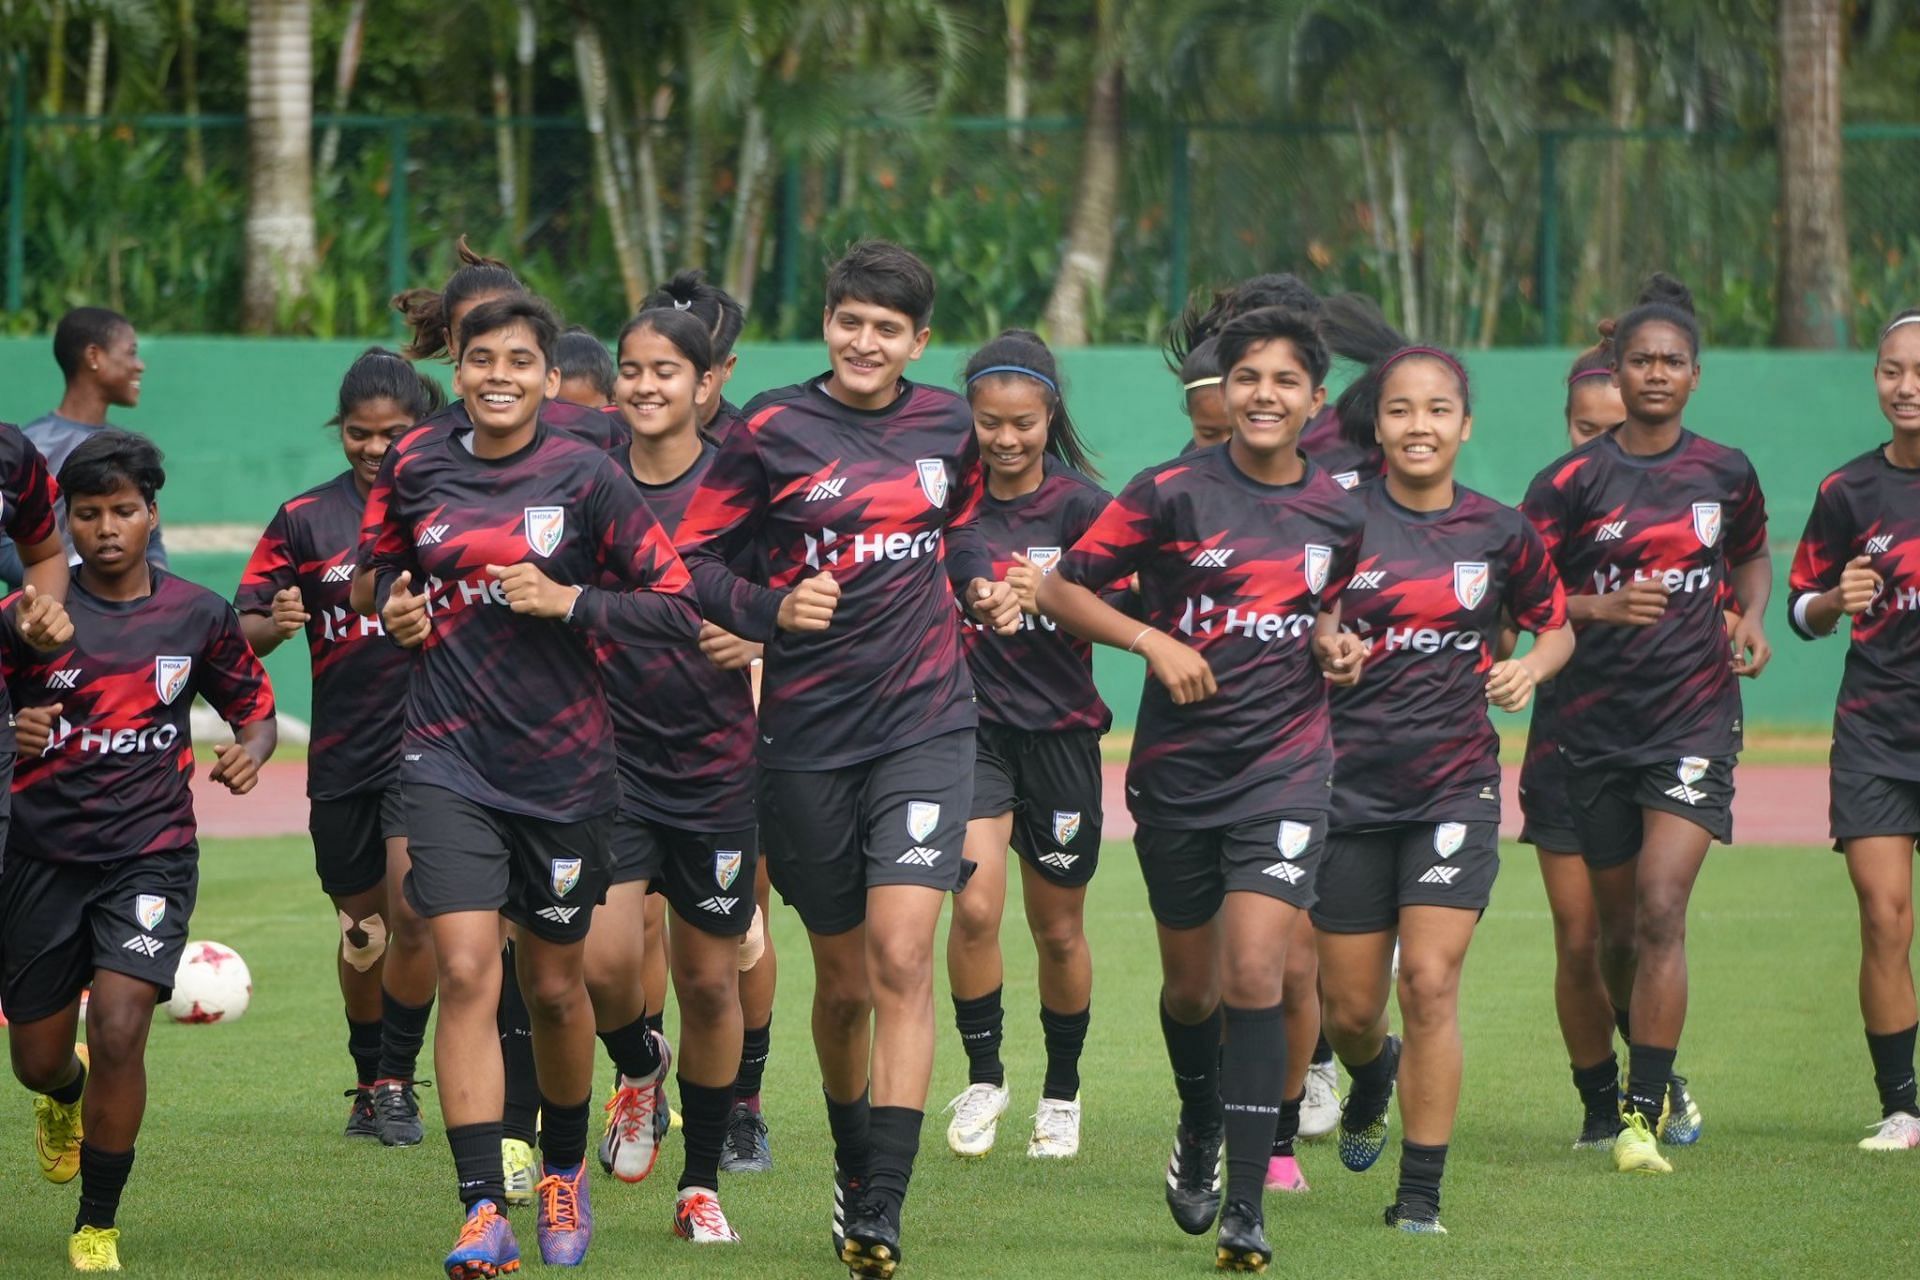 India will start their journey in the FIFA U-17 Women